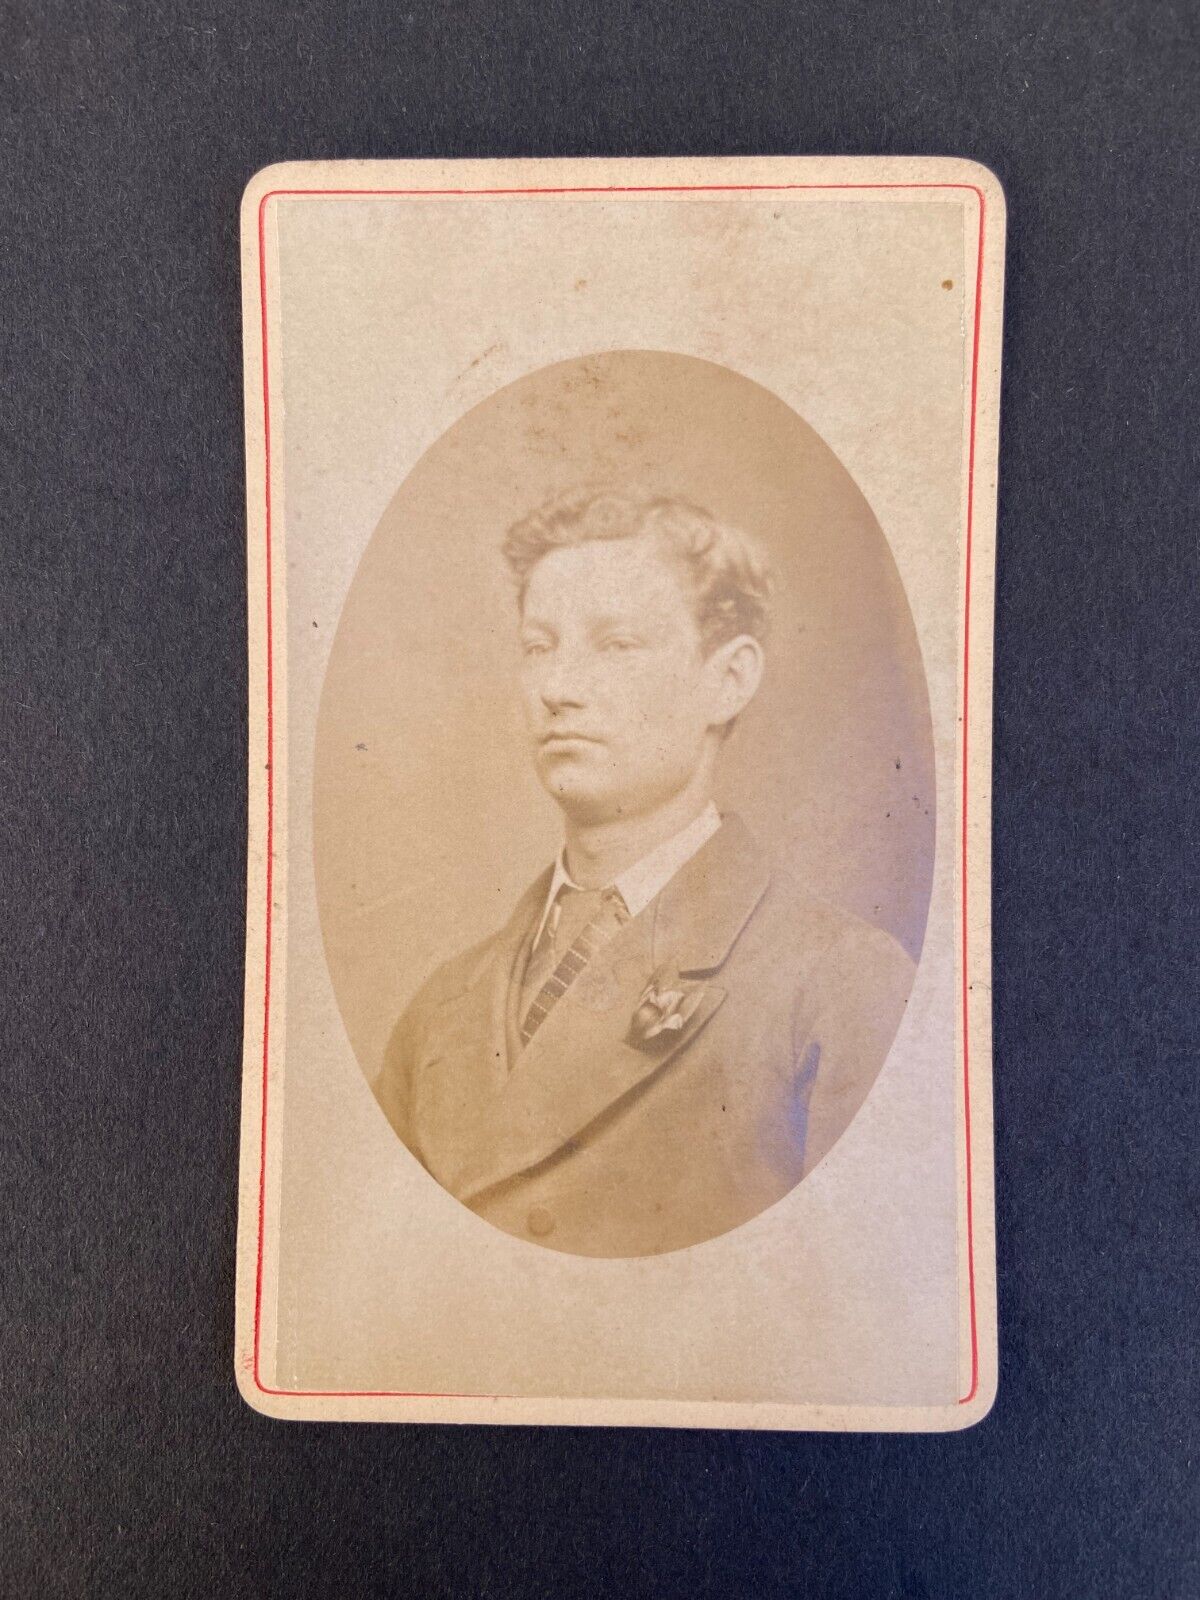 Old Vintage Antique CDV Photo Young Man in Suit Camden Town N.W. London England